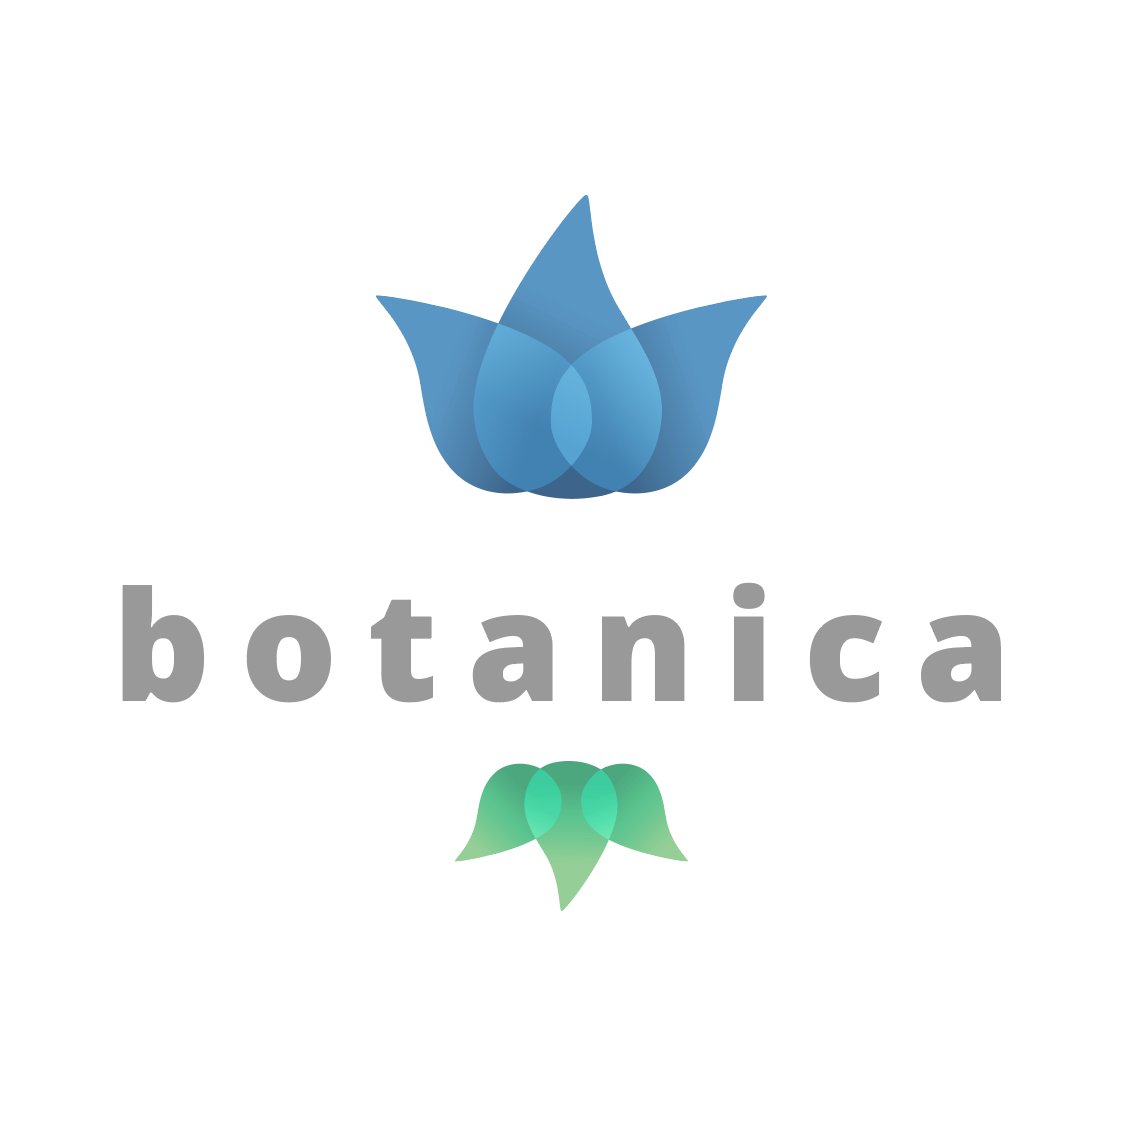 Botanica Testing Inc. is a certified 3rd Party Independent Laboratory specializing in CBD and Cannabis Testing in the State of Florida.